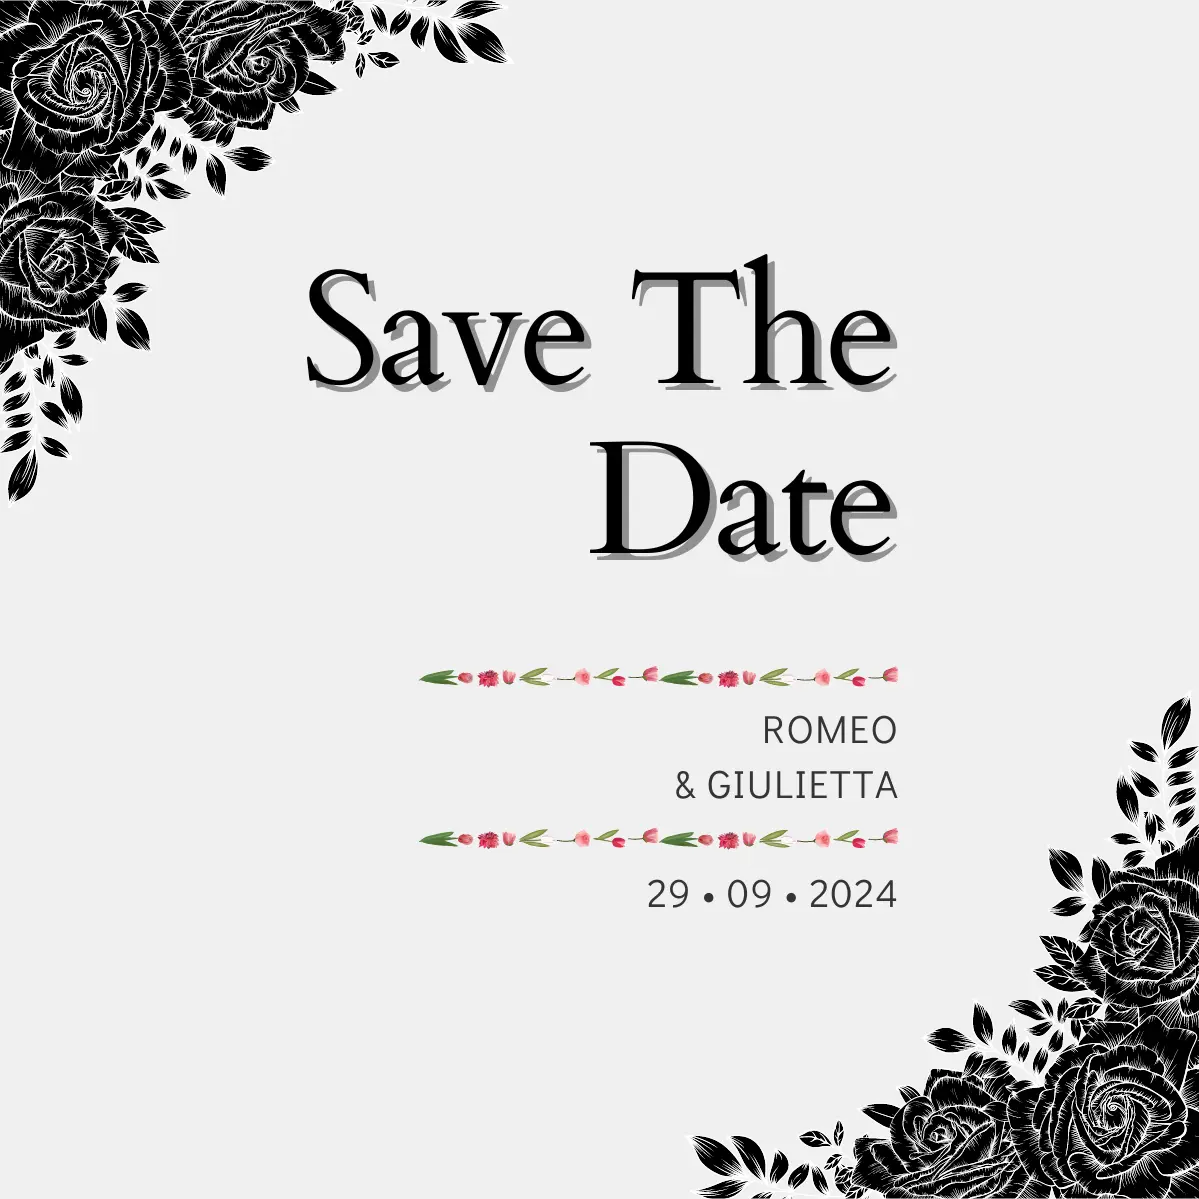 Save the date digitale - Save the date matrimonio WhatsApp gratis - Save-the-date WhatsApp